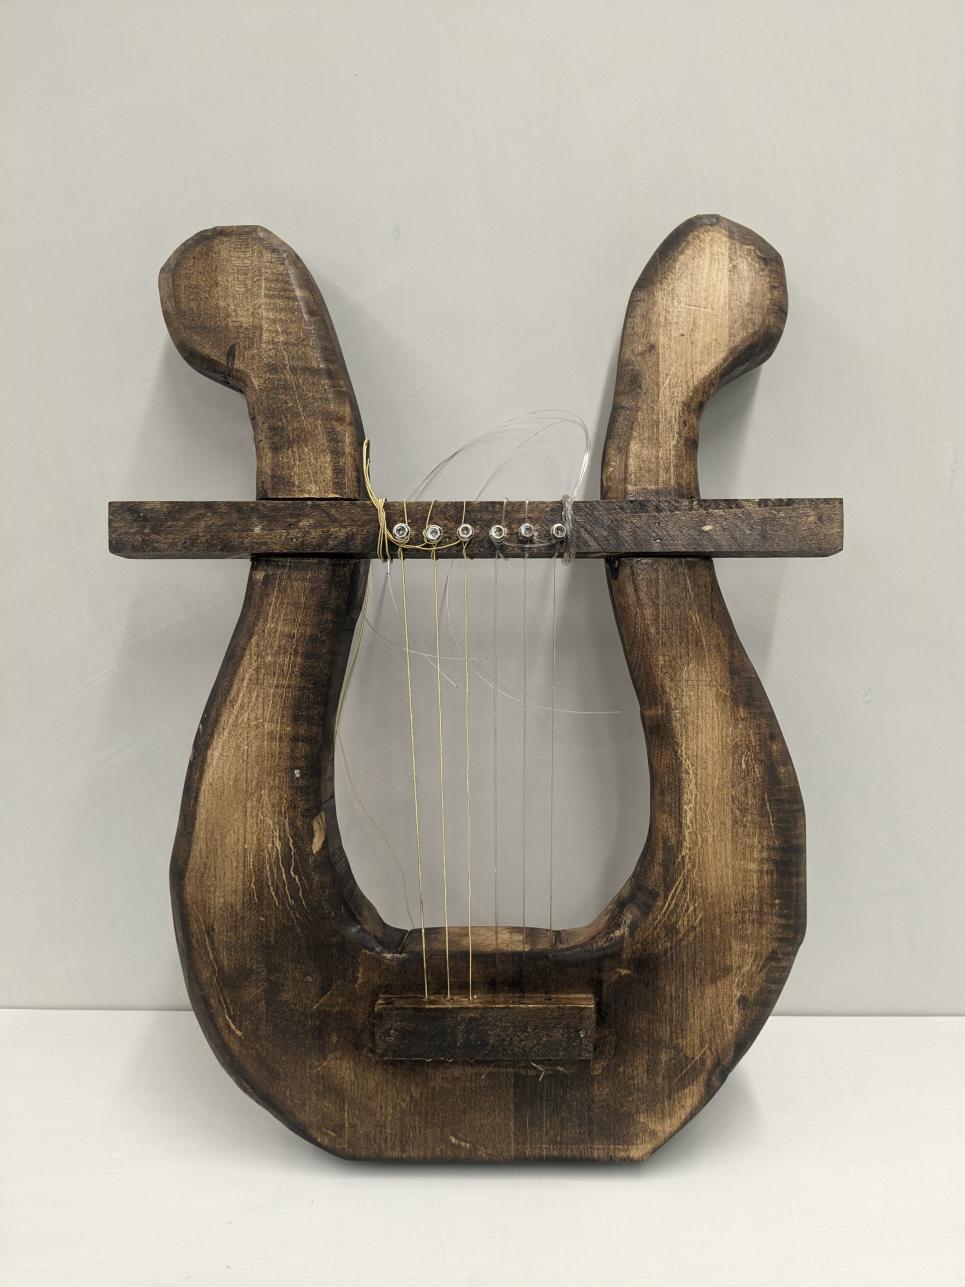 Recreation of an ancient lyre